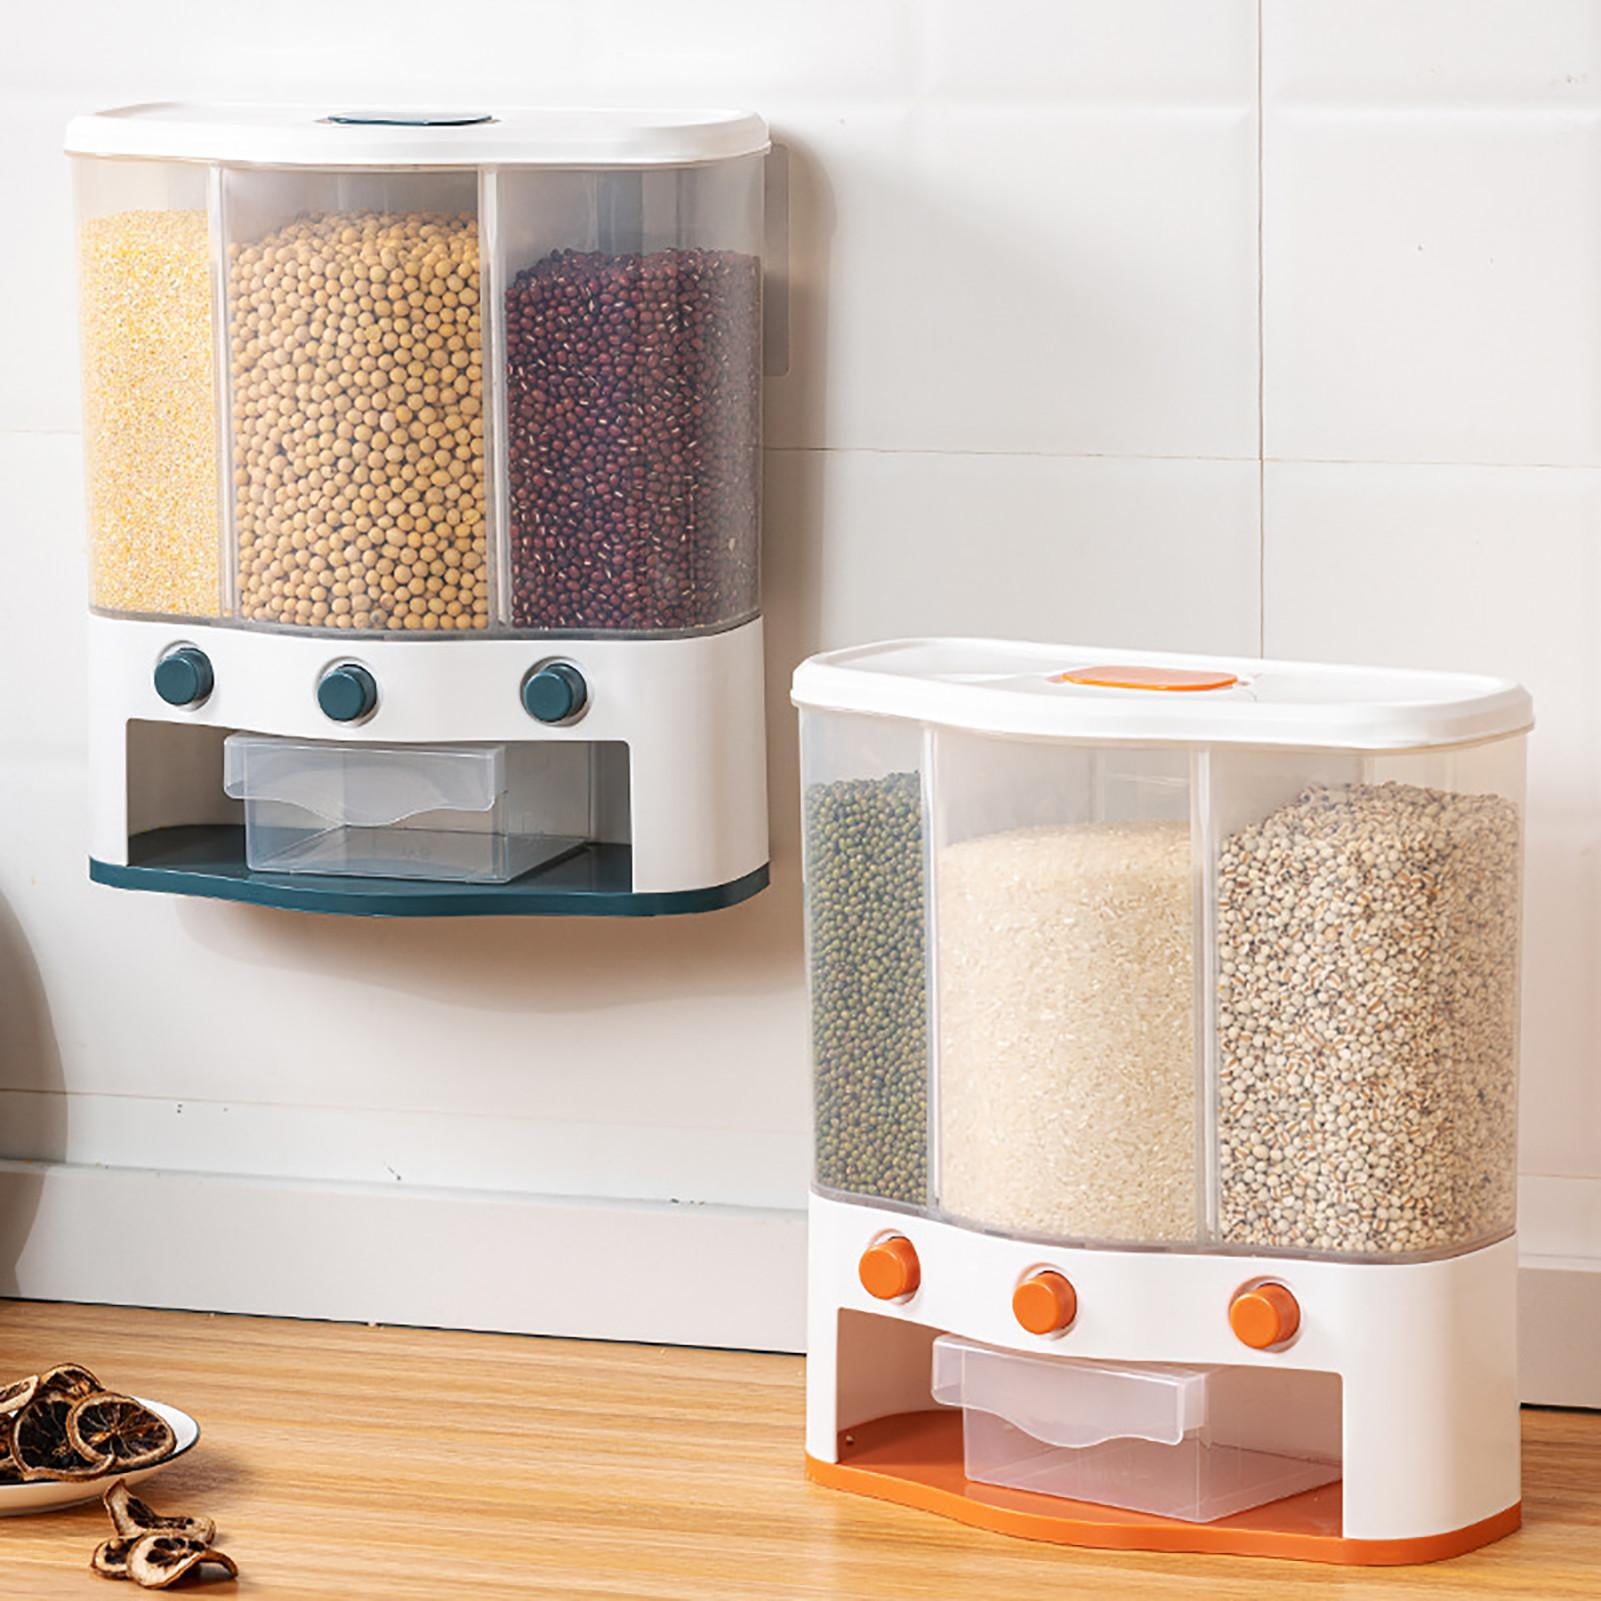 Wall-Mounted Dry Food Dispenser *plastic kitchen storage Grain & Rice container* 